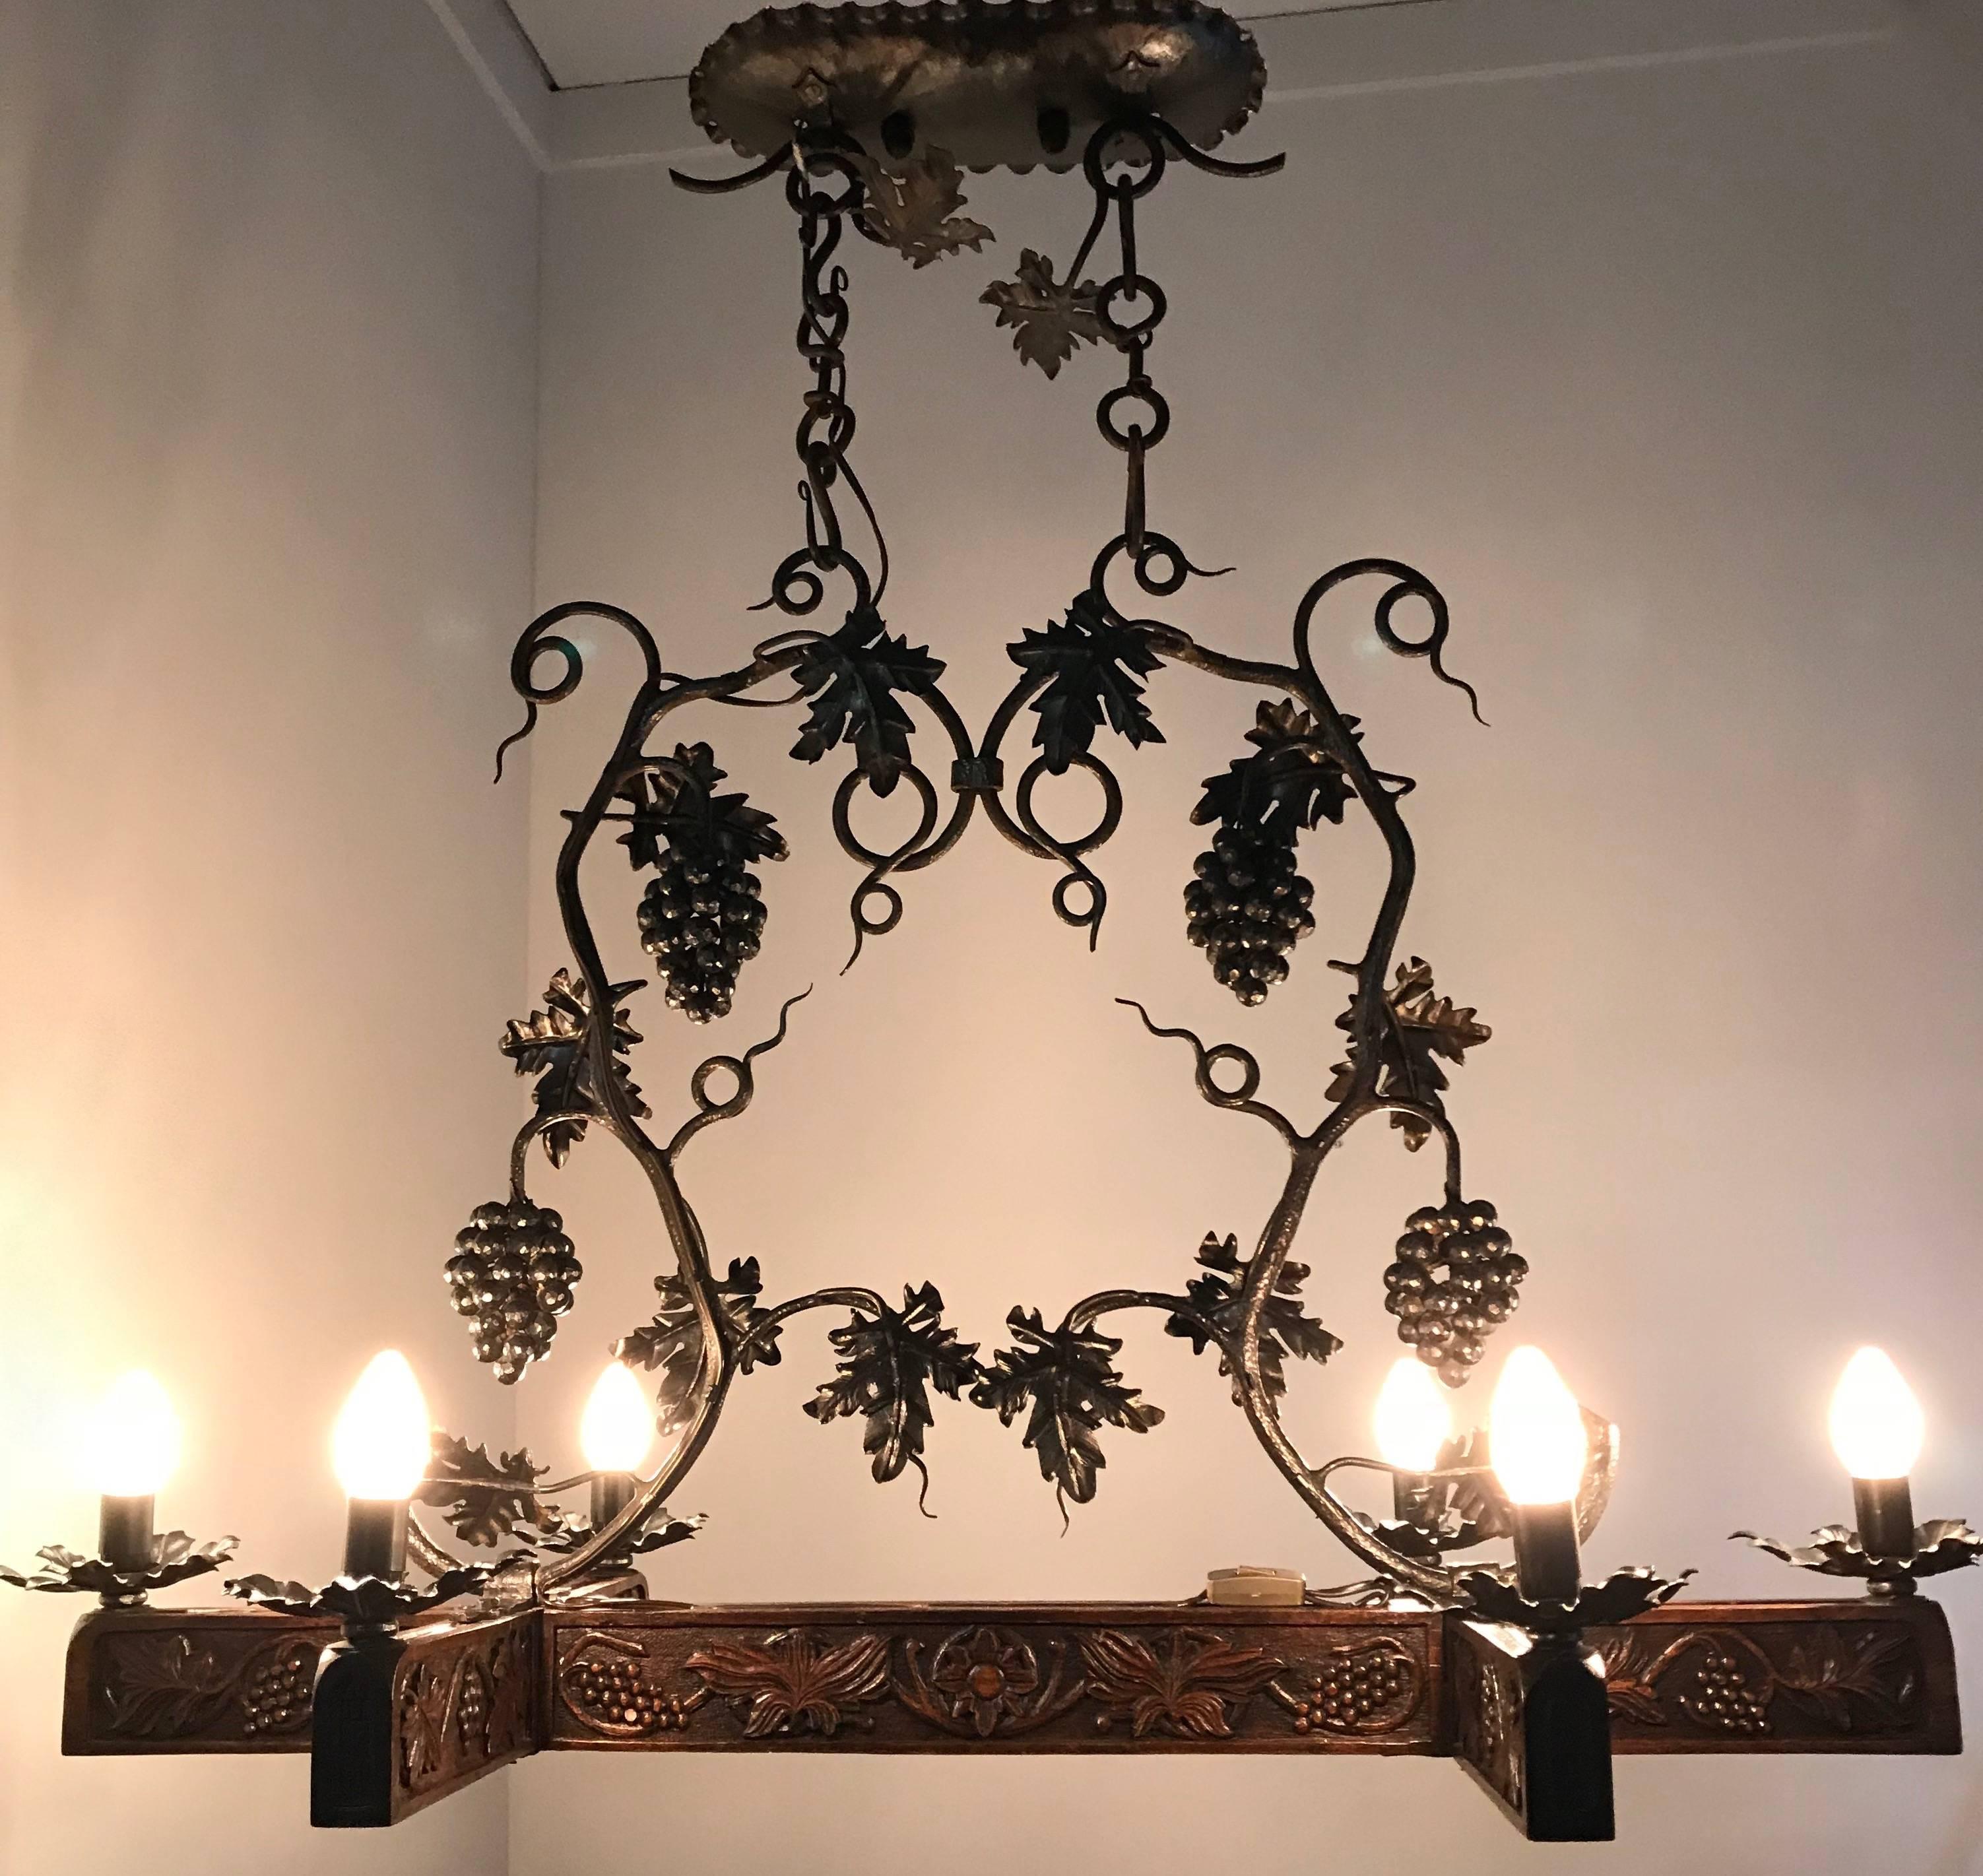 Unique Arts & Crafts work of lighting art.

The top quality craftsmanship that was put into this very well designed and amazingly decorative chandelier makes it the eyecatcher that it is. It is antique chandeliers like this that make our job so